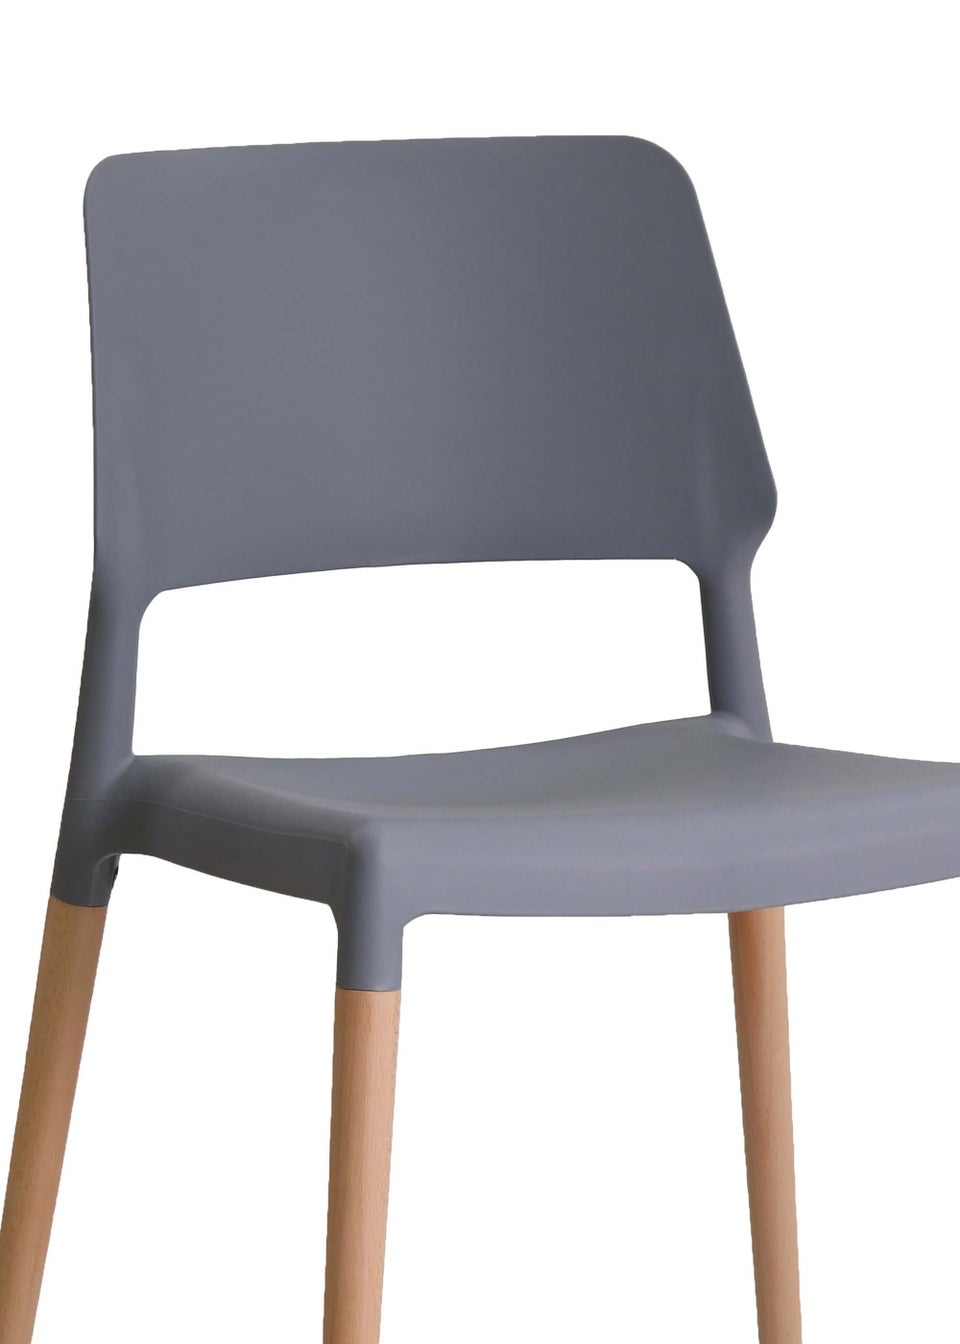 LPD Furniture Set of 2 Riva Chairs Grey  (810x540x550mm)